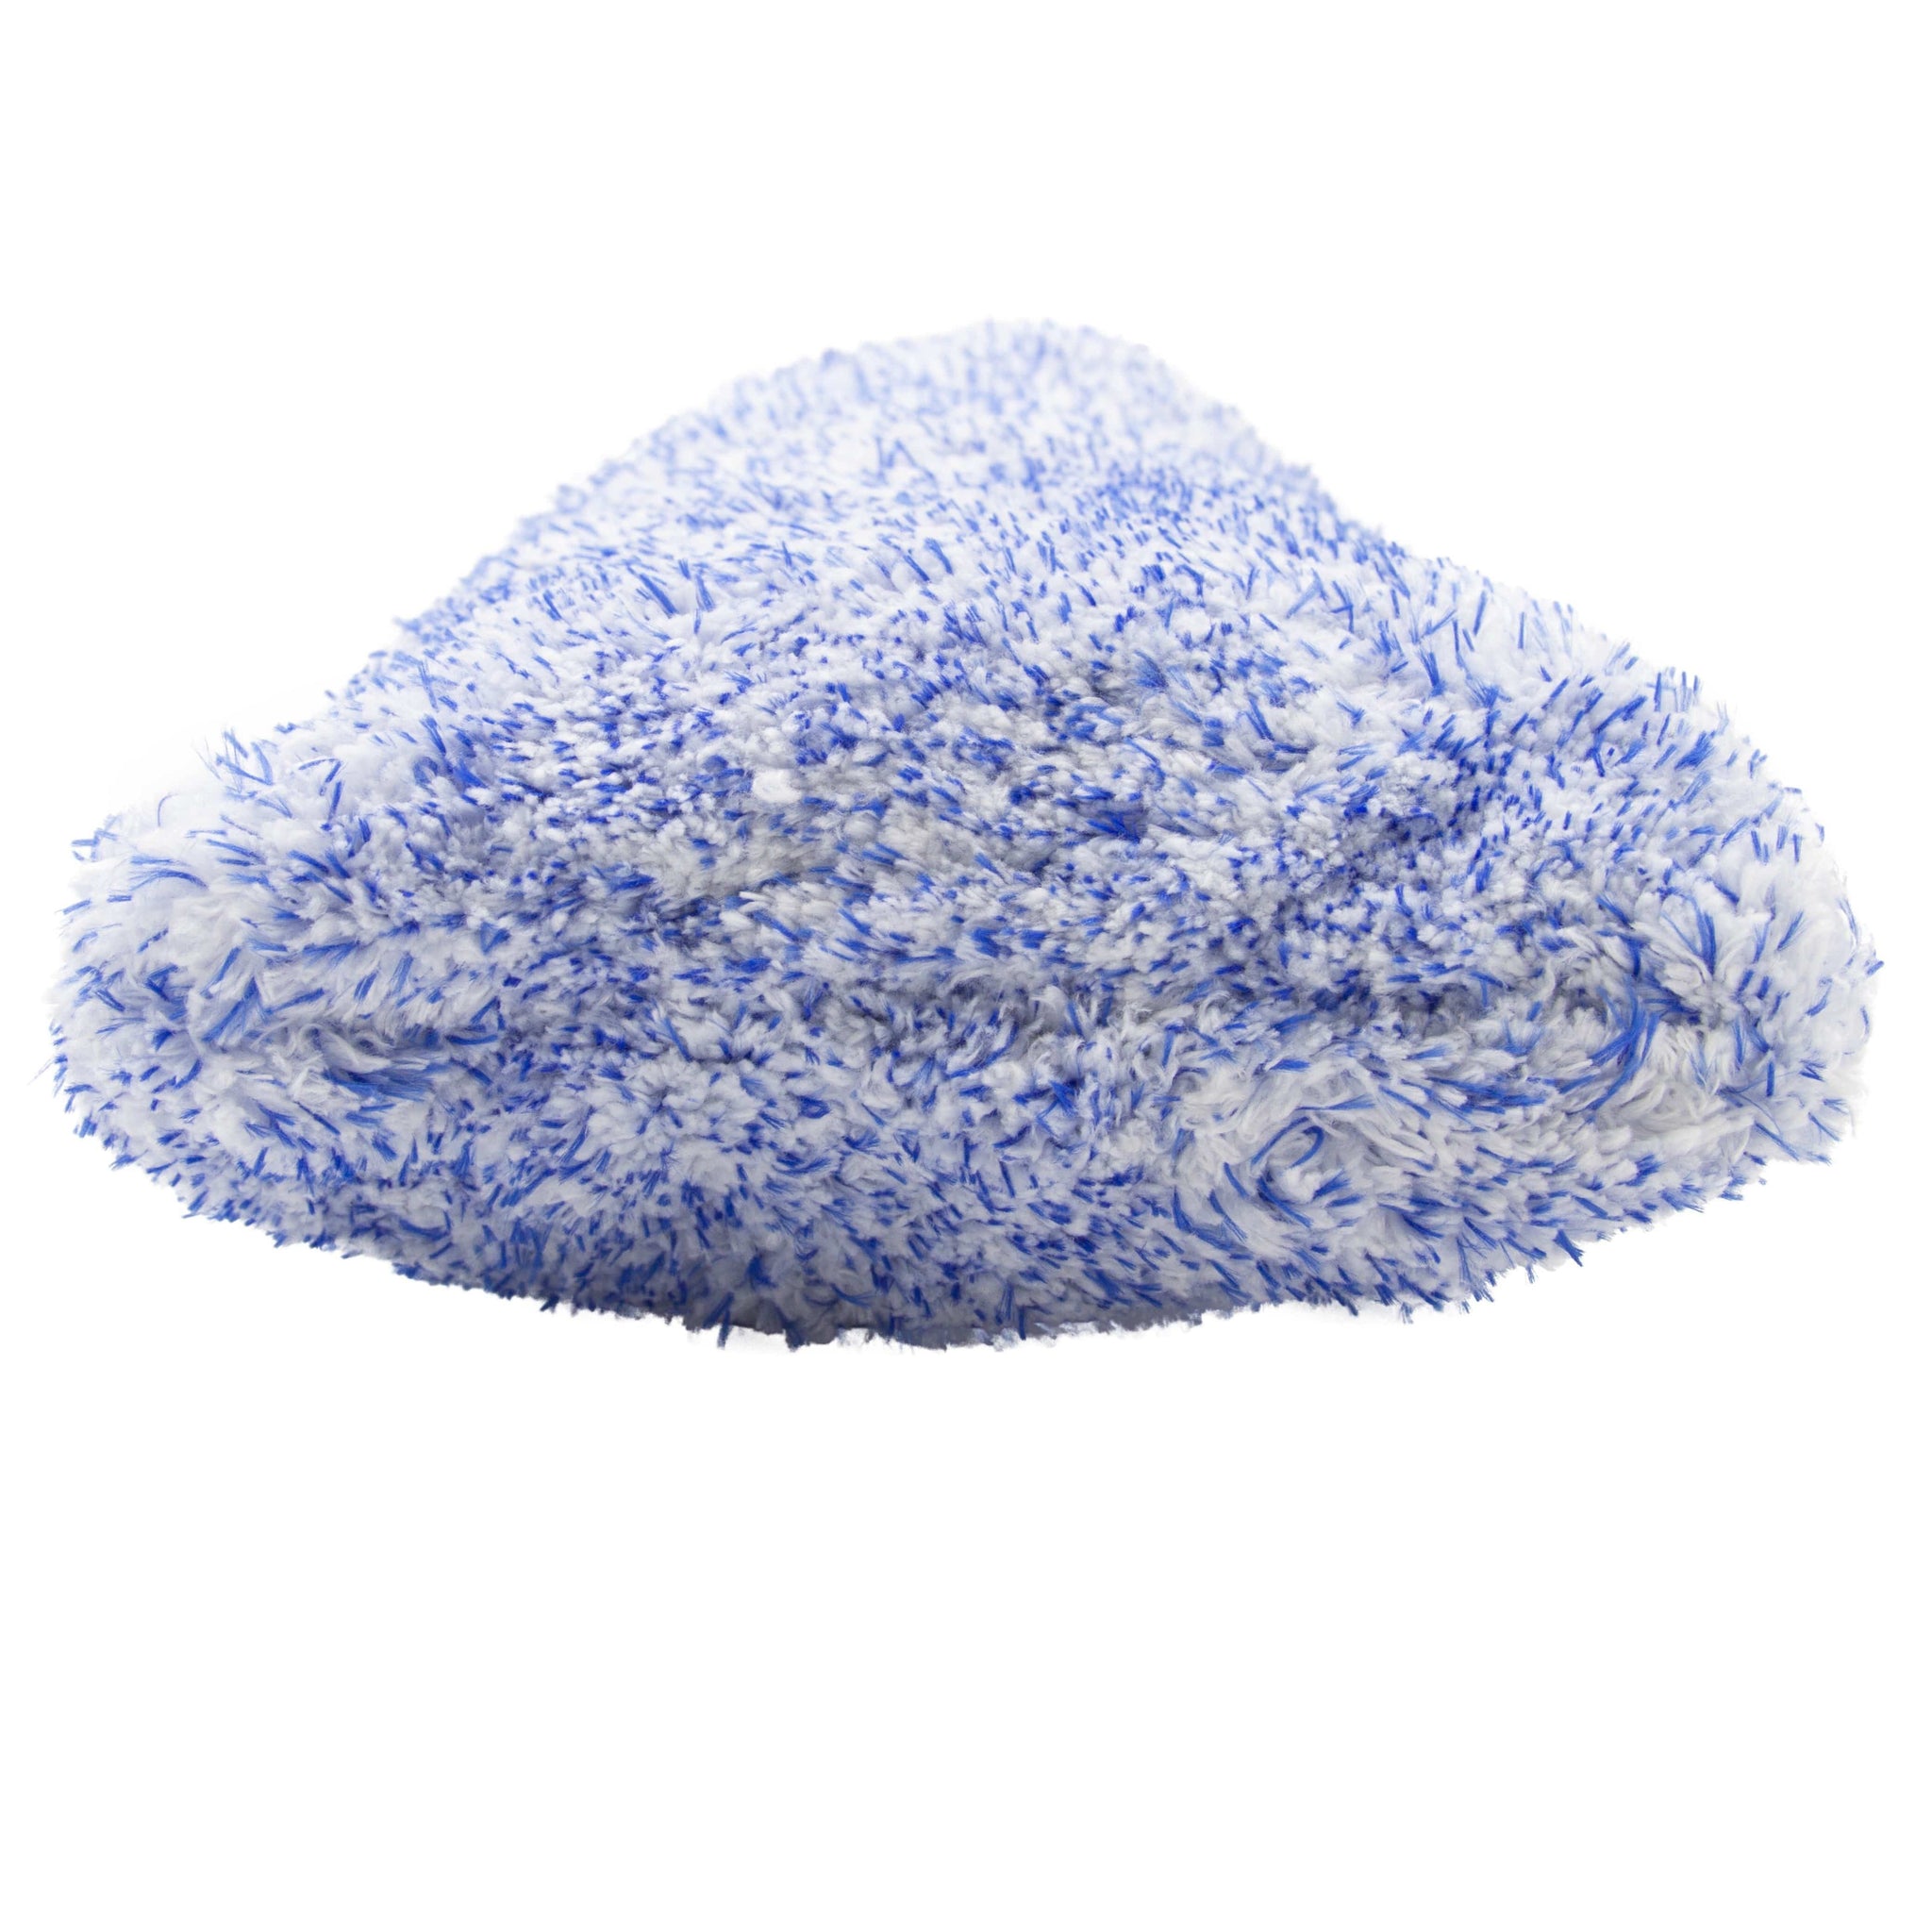 Microfiber Wash Mitt Long Pile Strand- Thick and Fluffy Detail Mitt